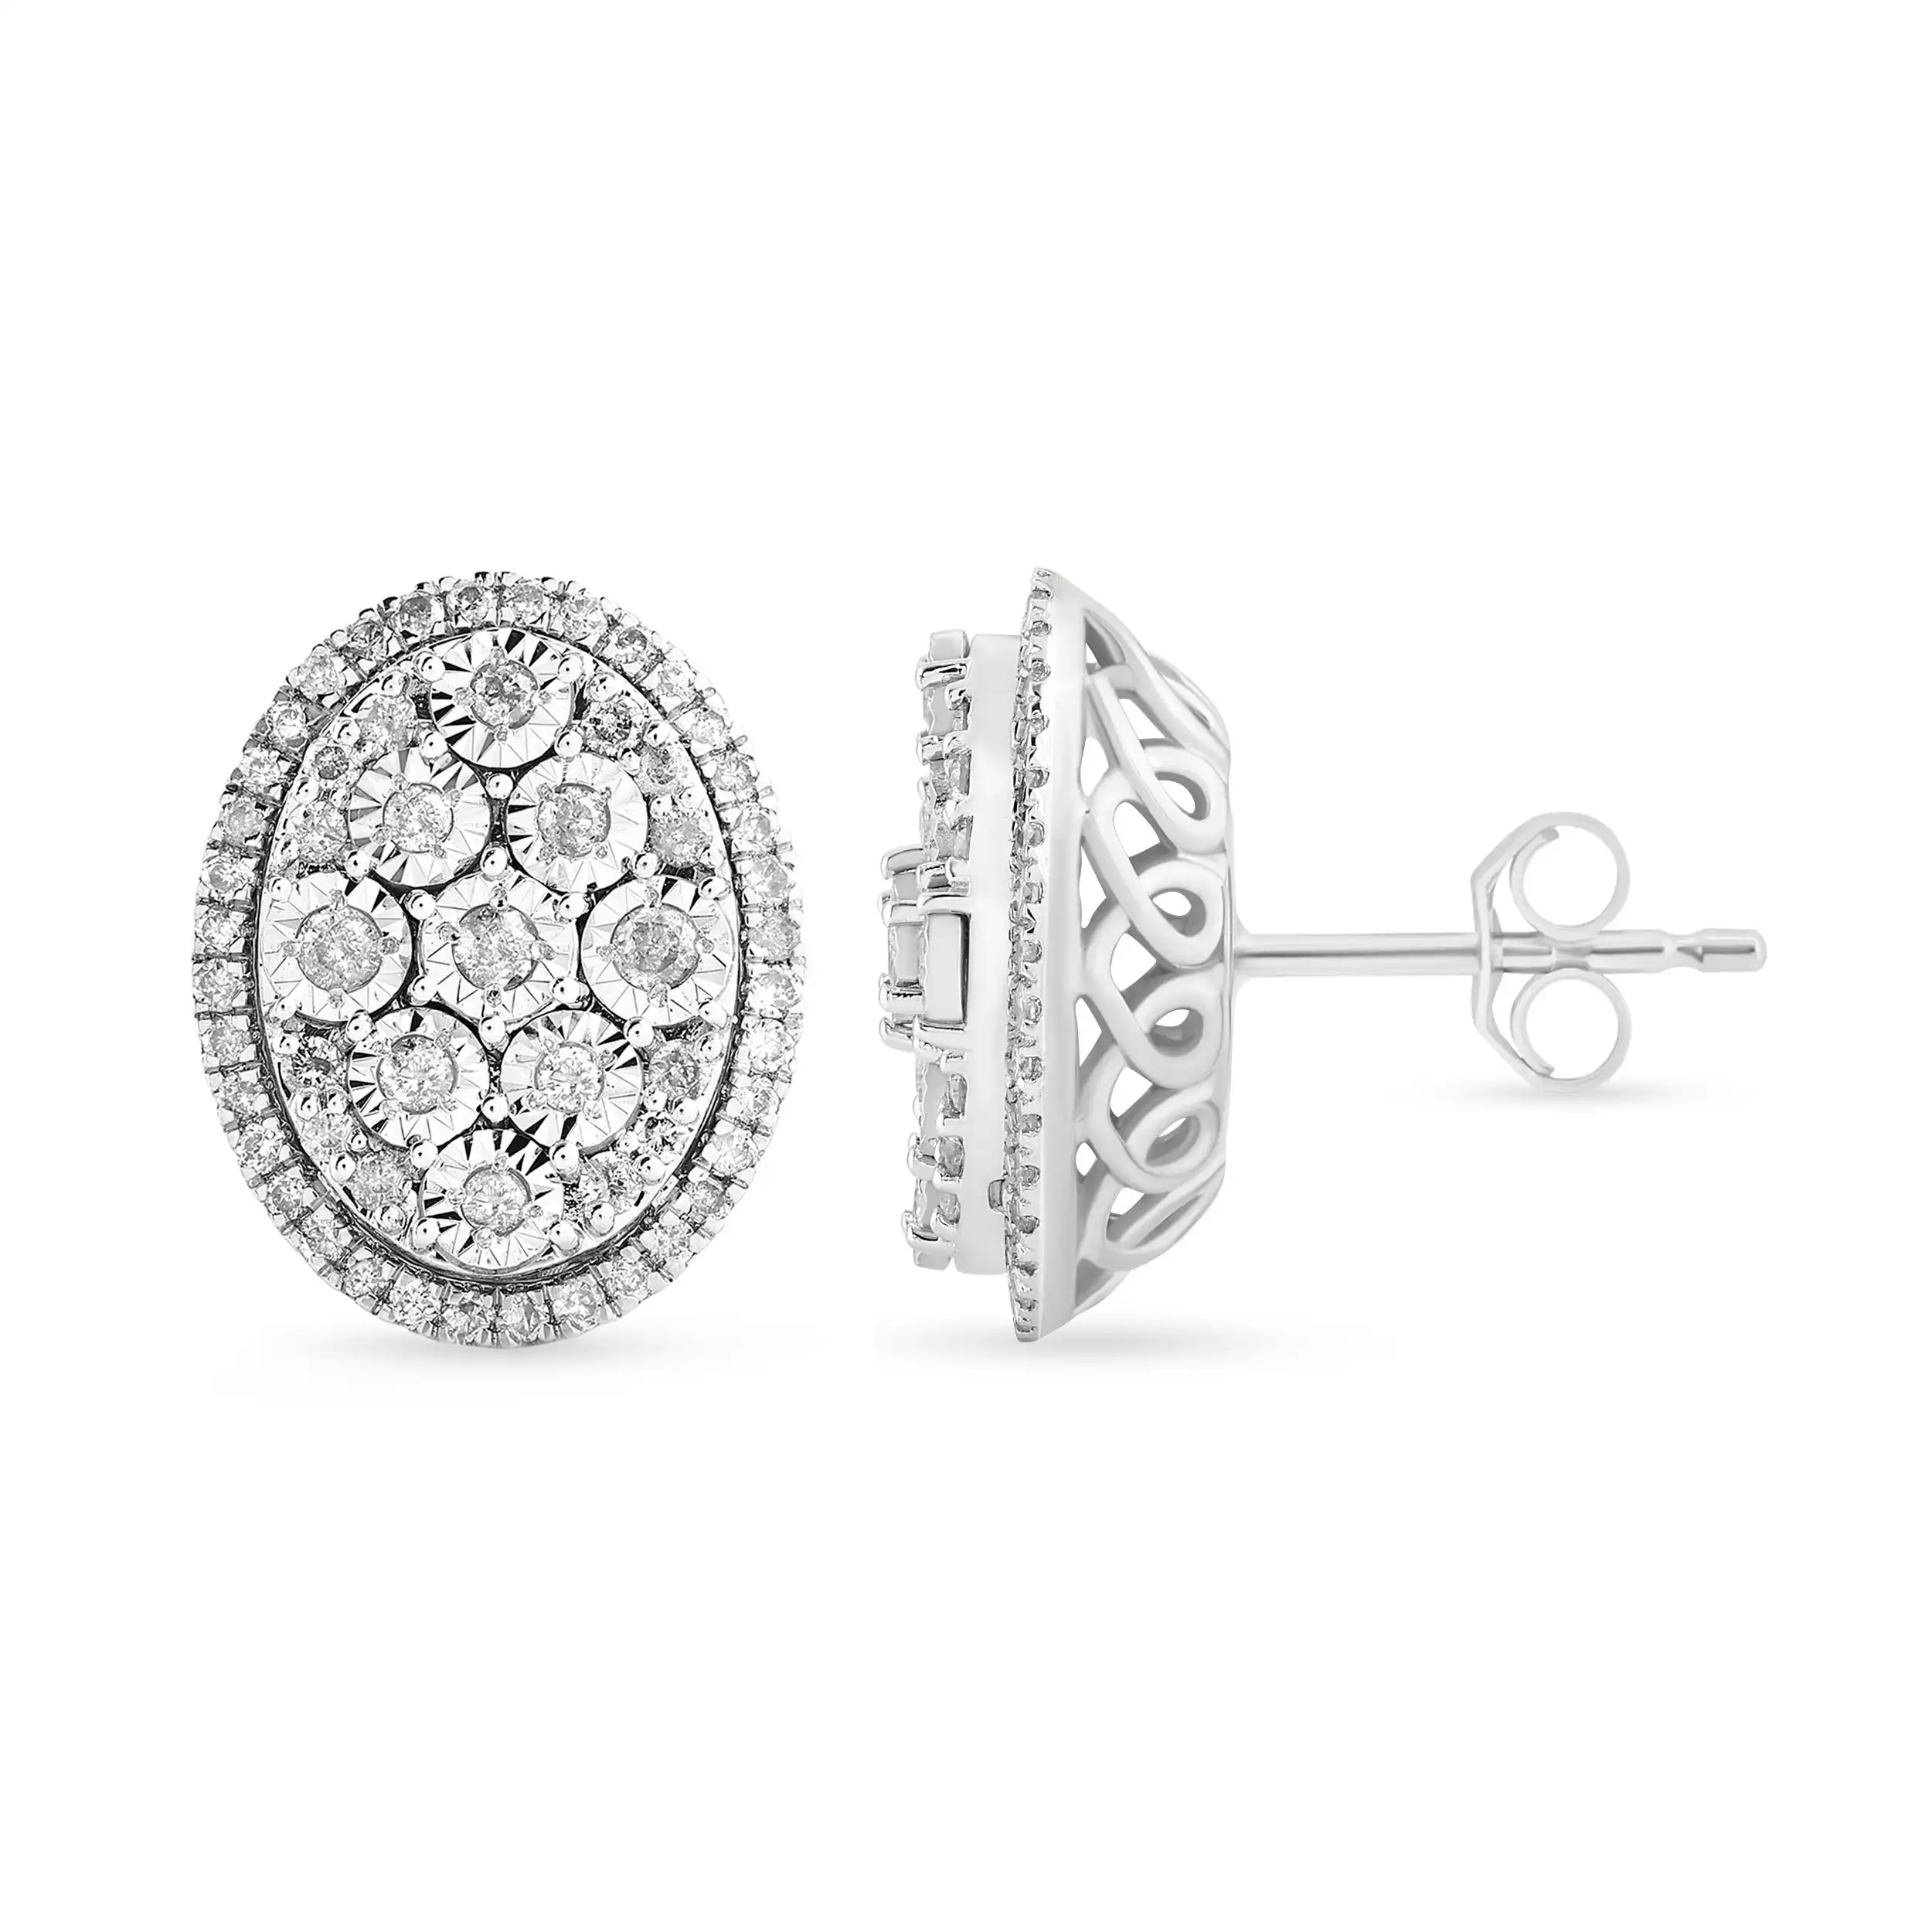 Halo Oval Earrings with 1/2ct of Diamonds in 9ct White Gold